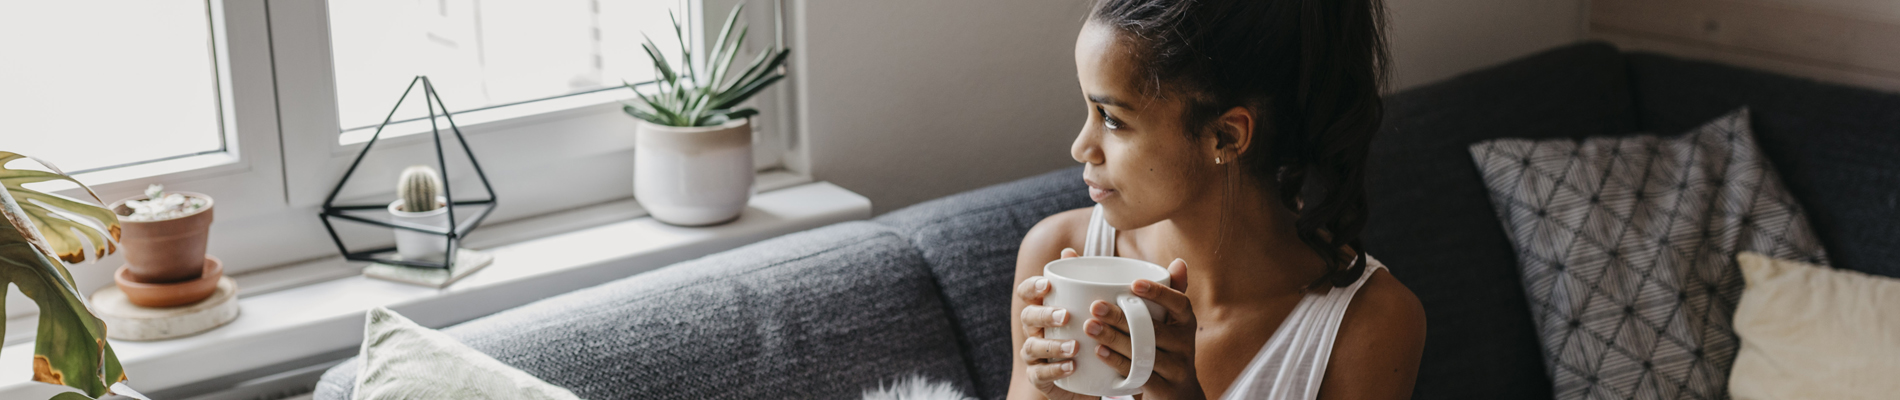 Woman gazing out window on couch with coffee